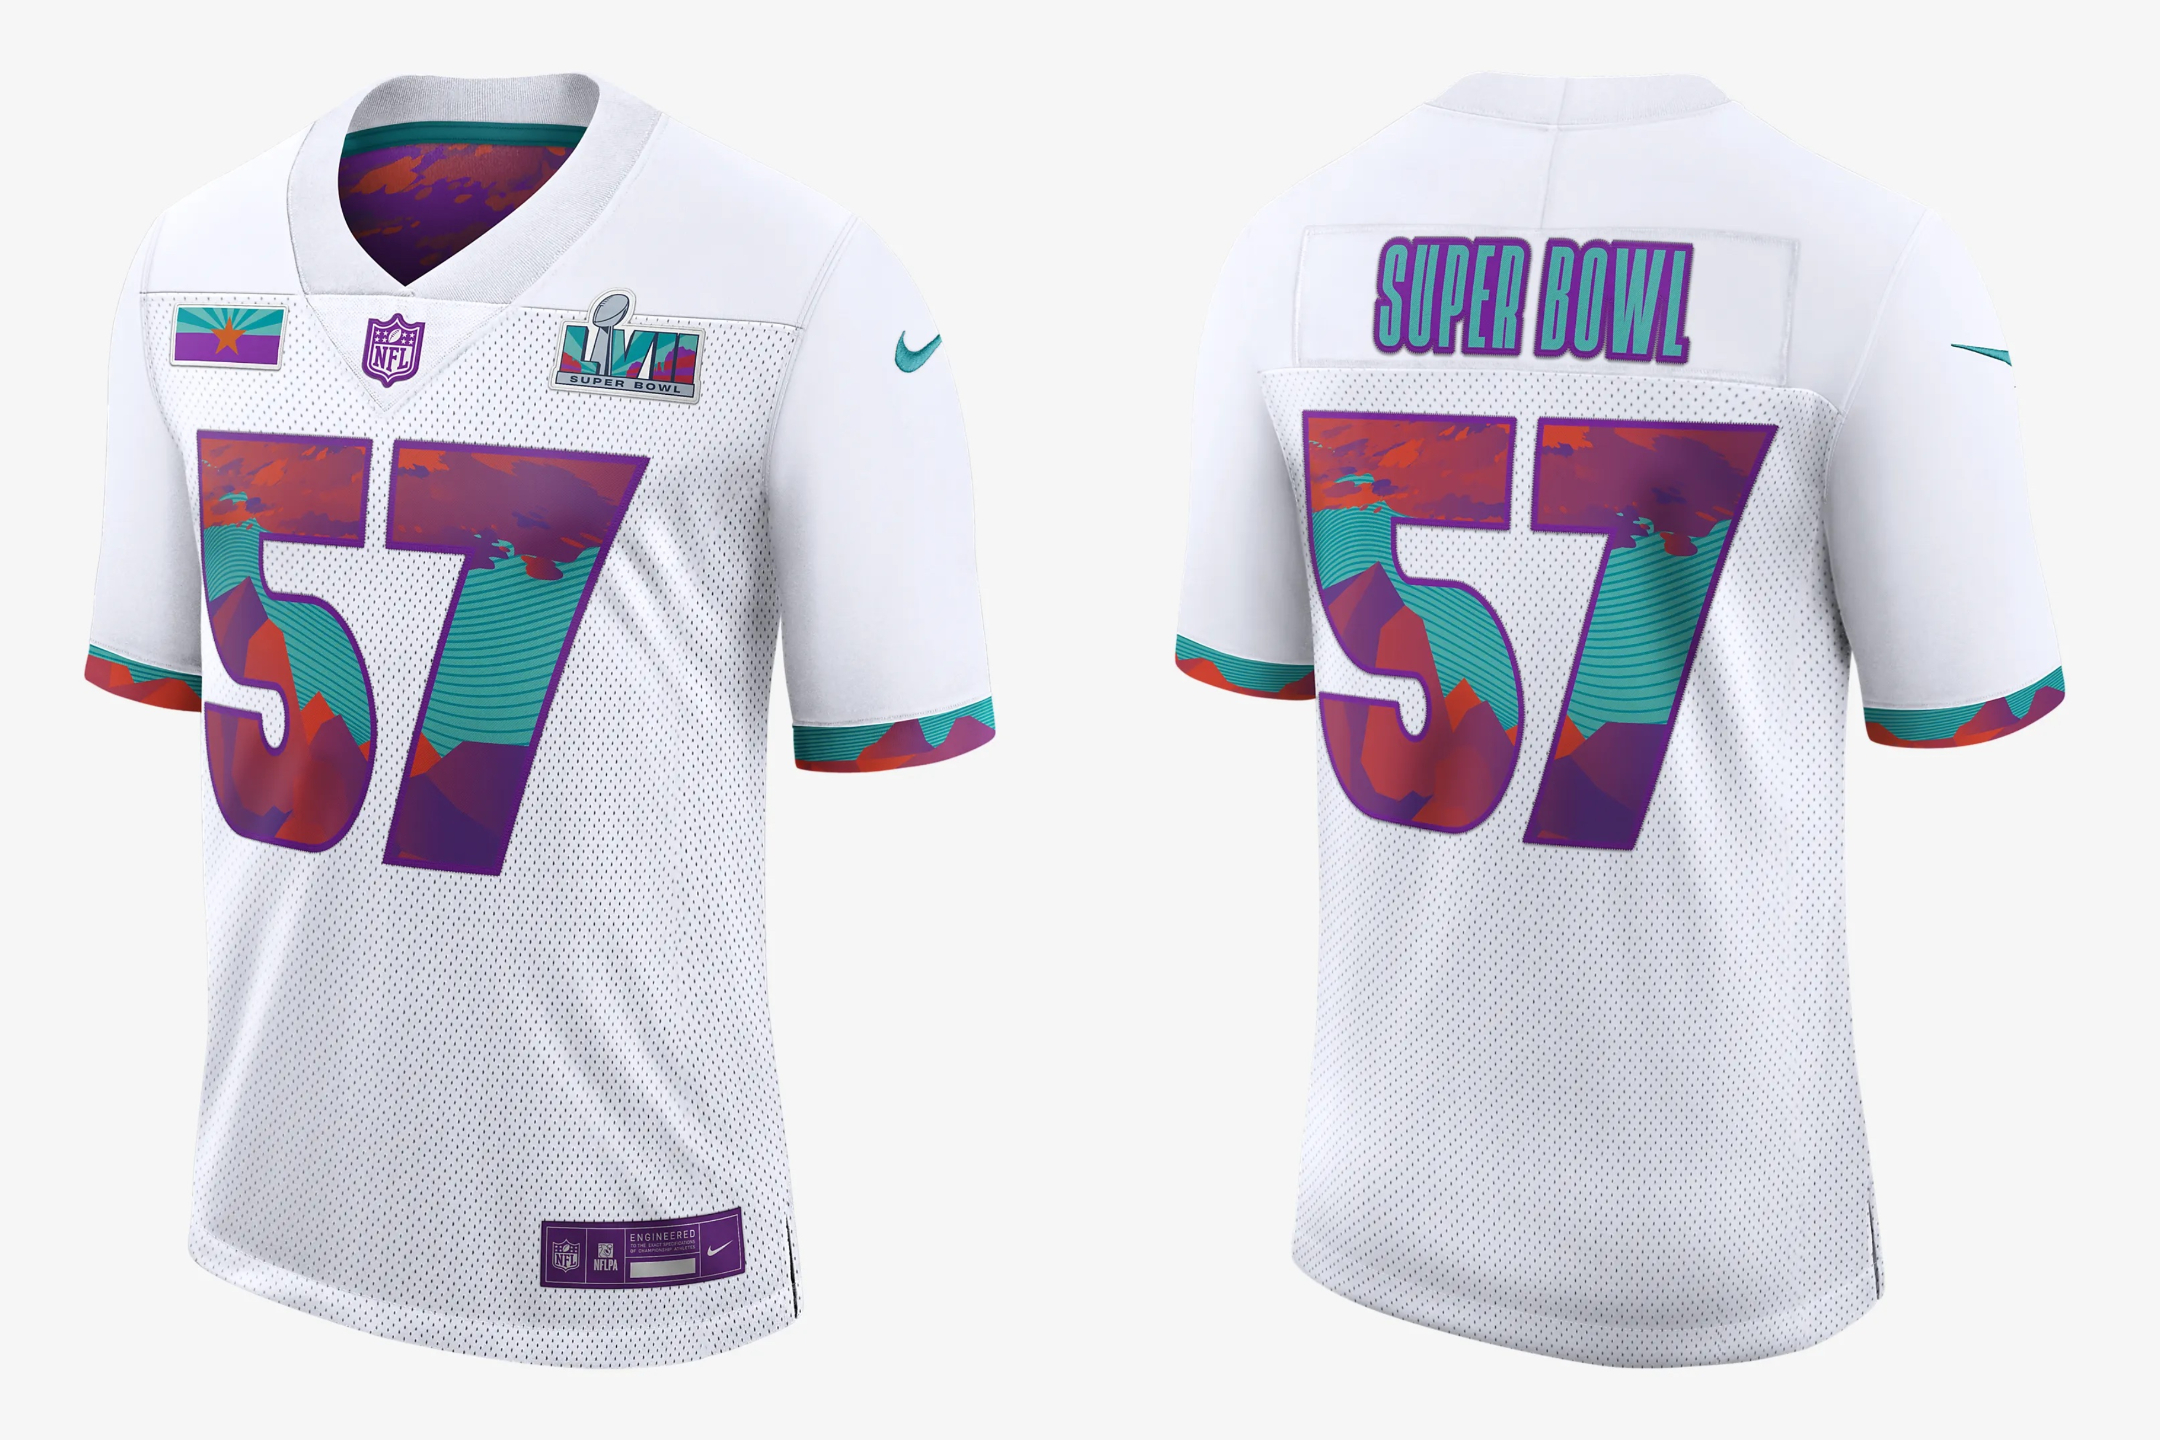 Nike's Jersey For The Super Bowl Has A Classic '90s Throwback Vibe